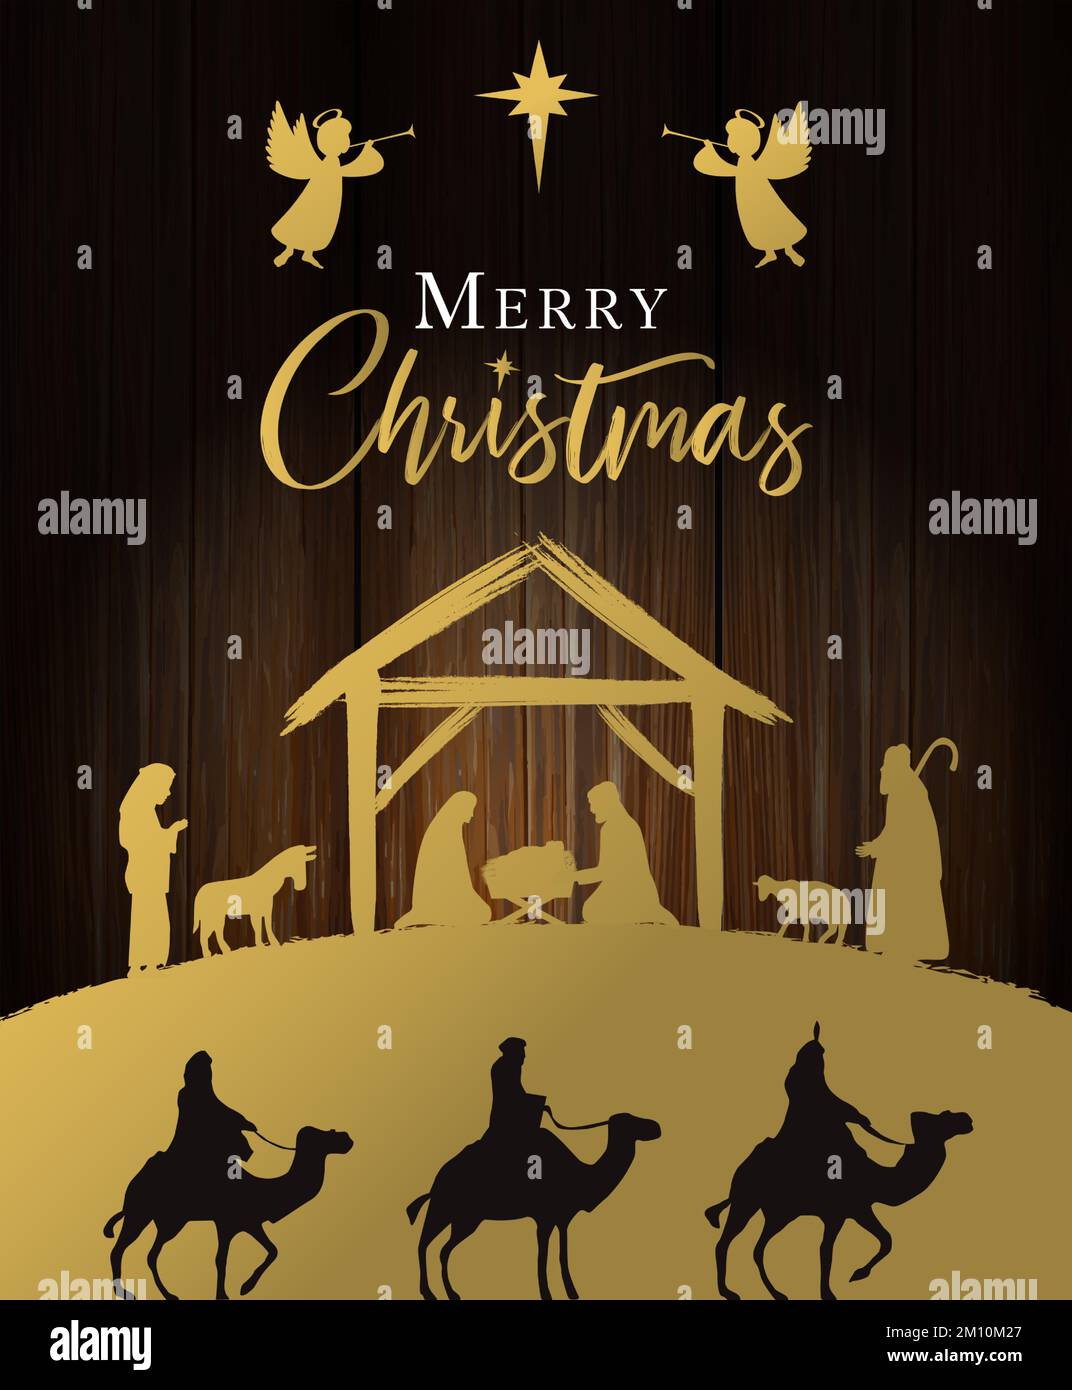 Golden Nativity scene with Holy family and Merry Christmas calligraphy on wooden texture. Jesus in manger, Mary, Joseph, wisemen, shepherds, angels Stock Vector